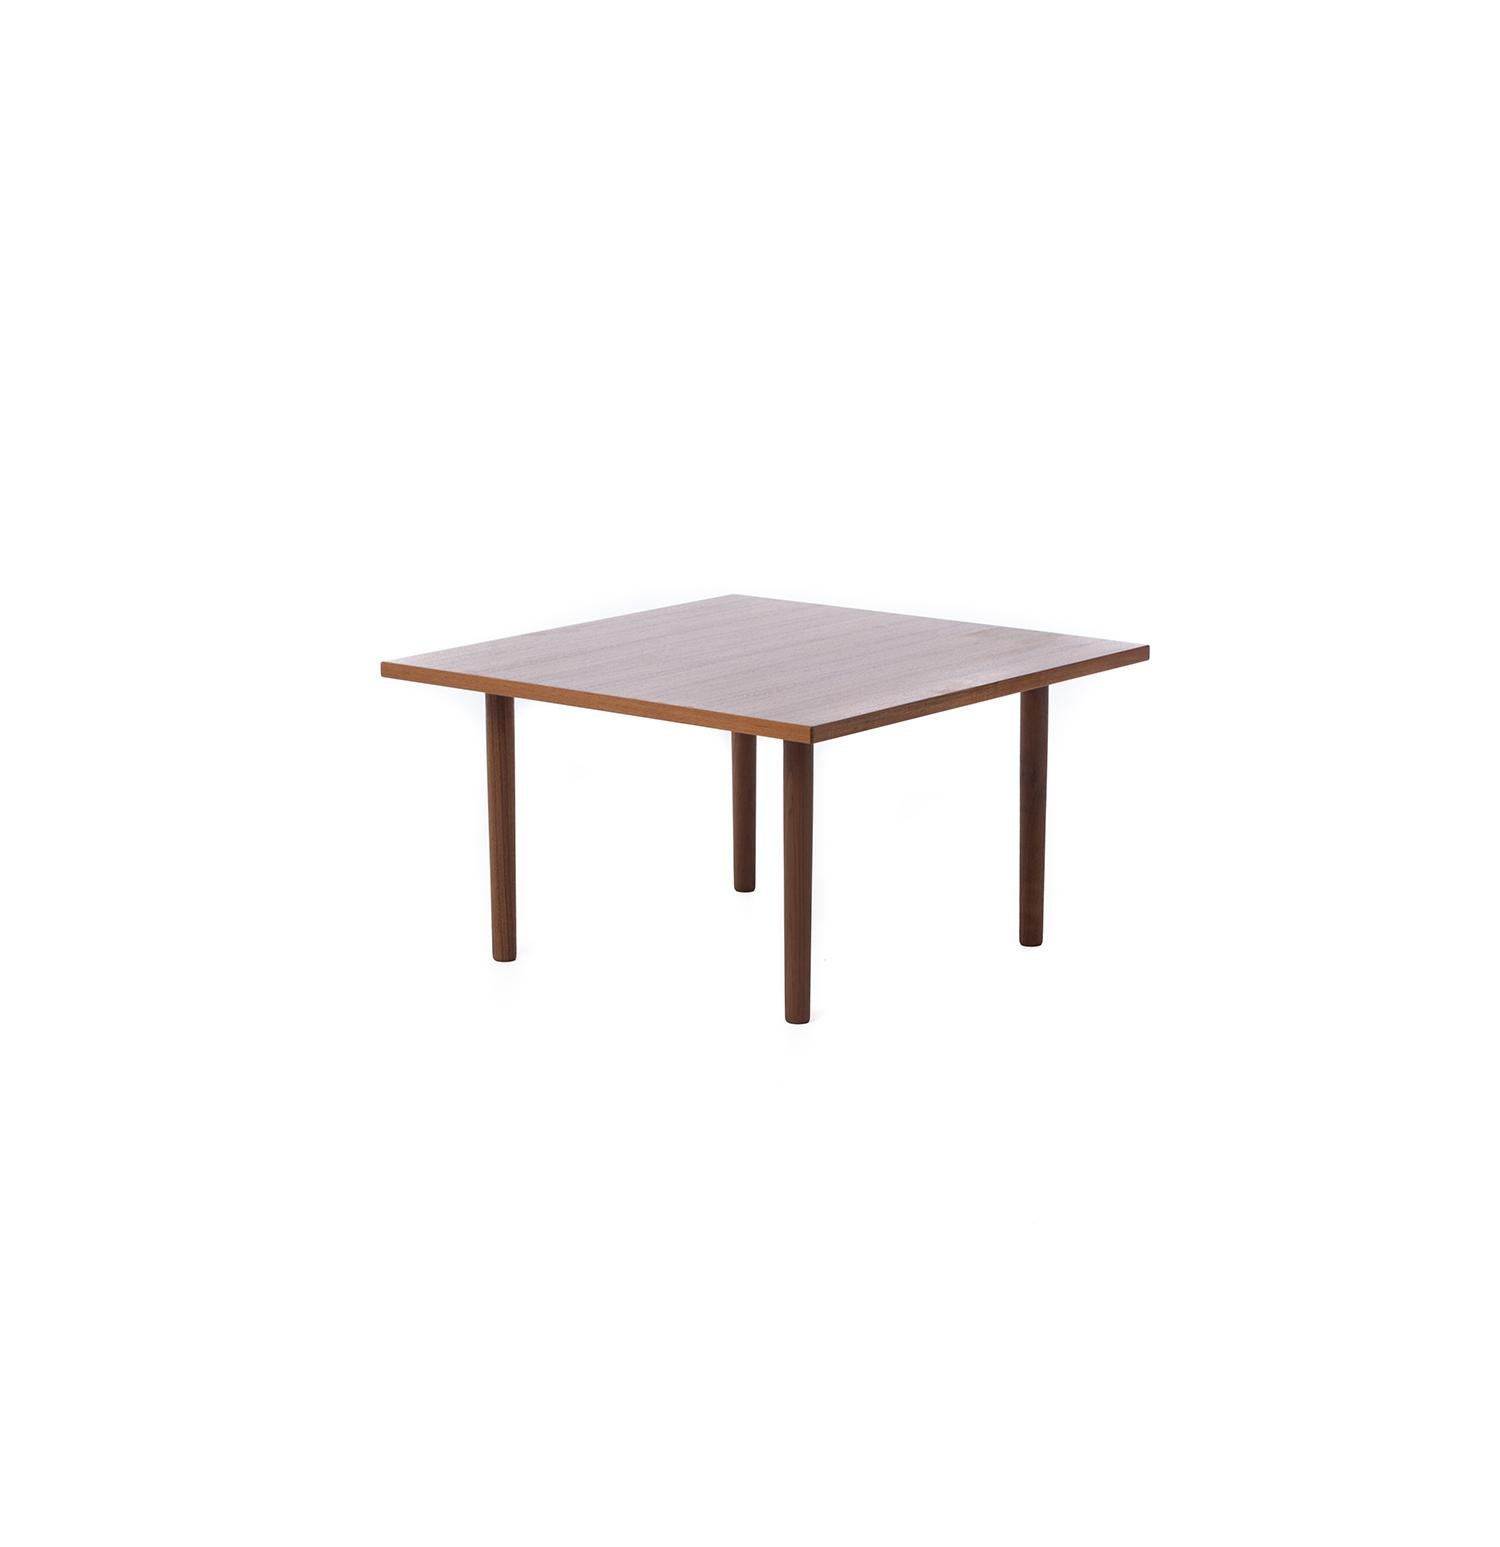 Hans J Wegner Square Teak Coffee Table In Excellent Condition For Sale In Minneapolis, MN